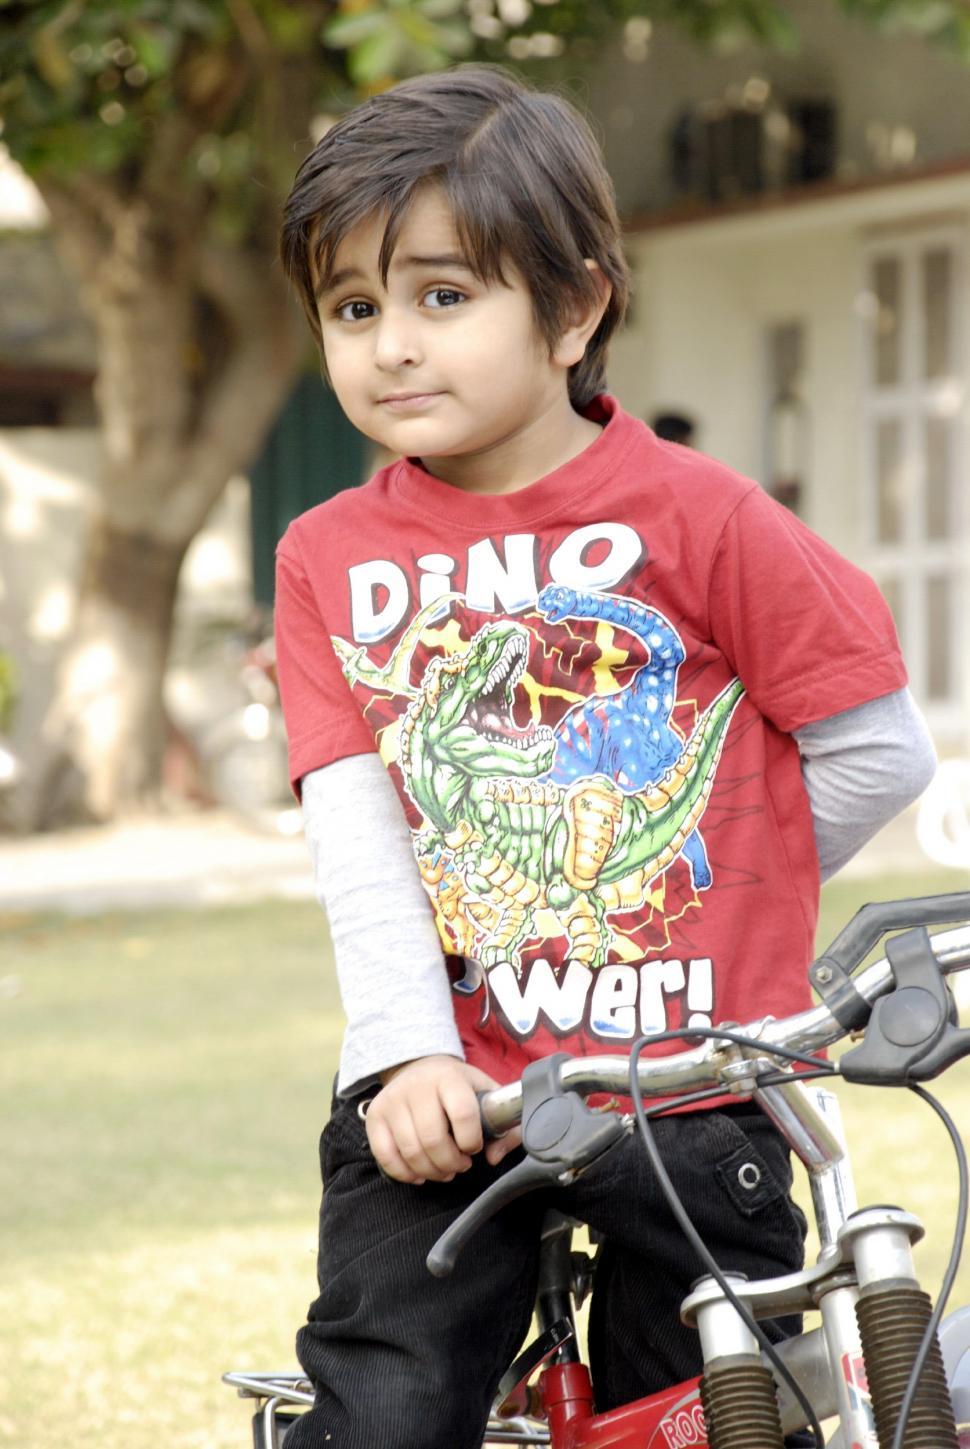 Free Image of Cute Child with Bicycle 